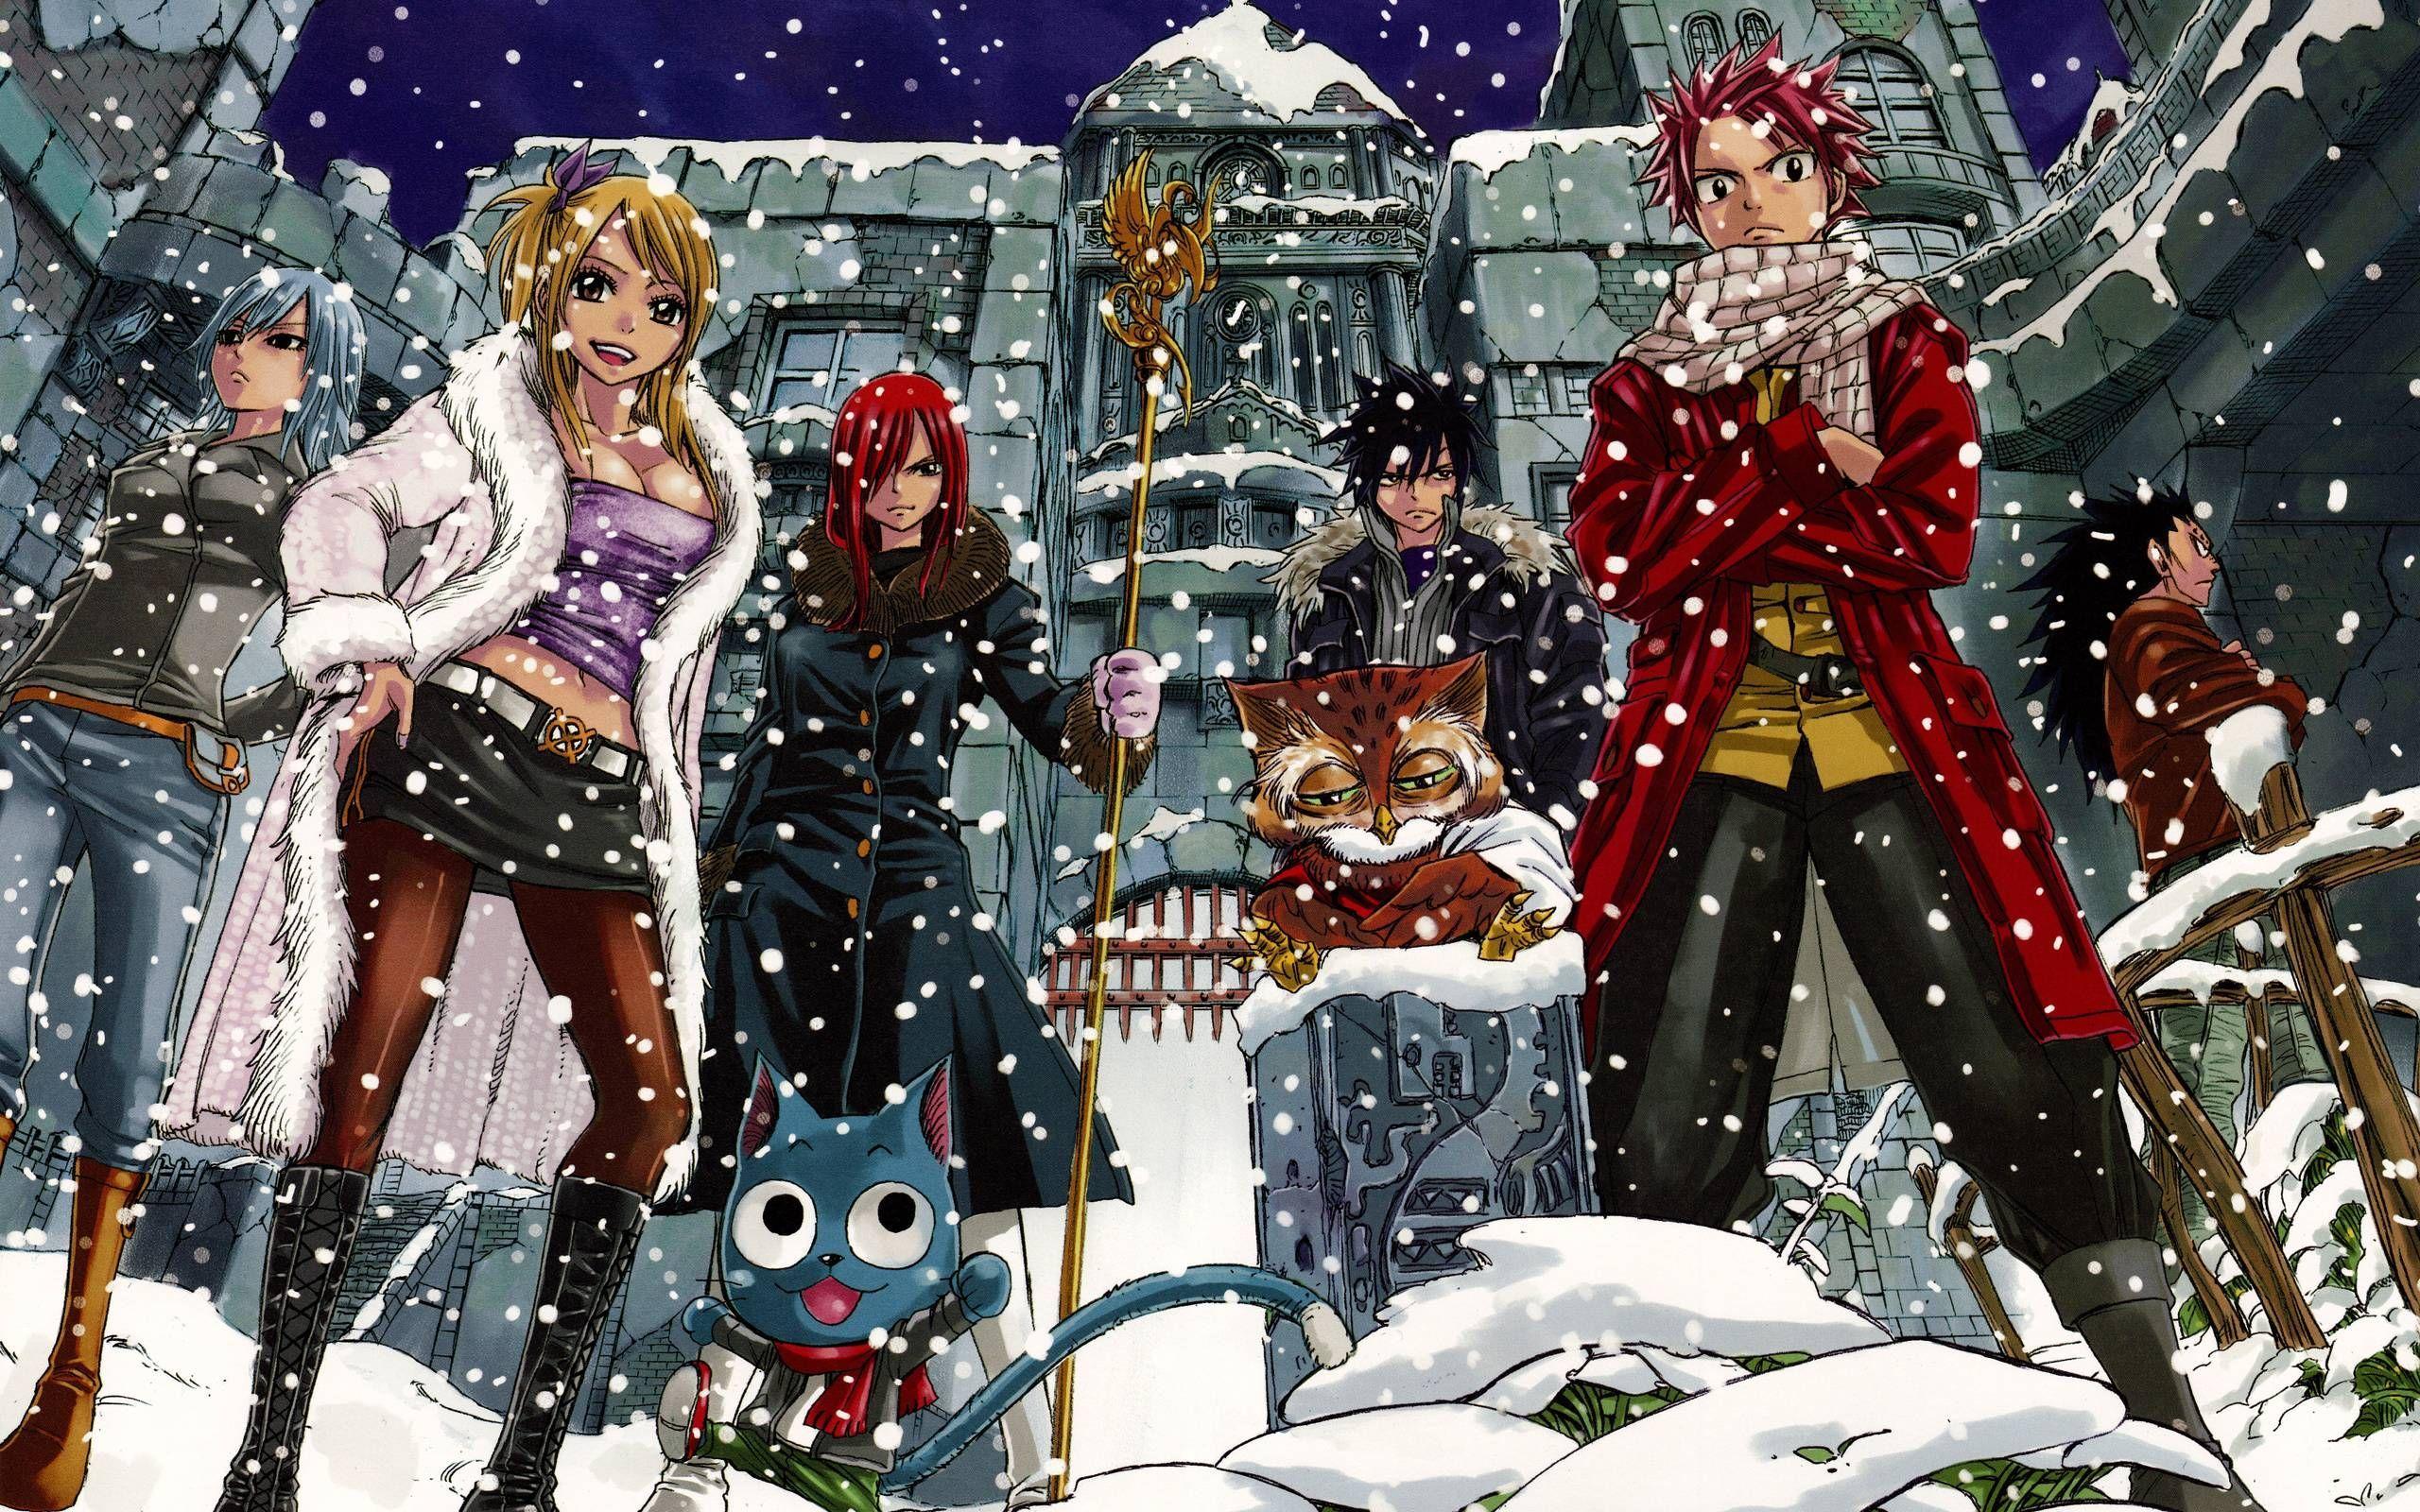 Fairy Tail Wallpaper Group. HD Wallpaper. Fairy tail, Fairy tail